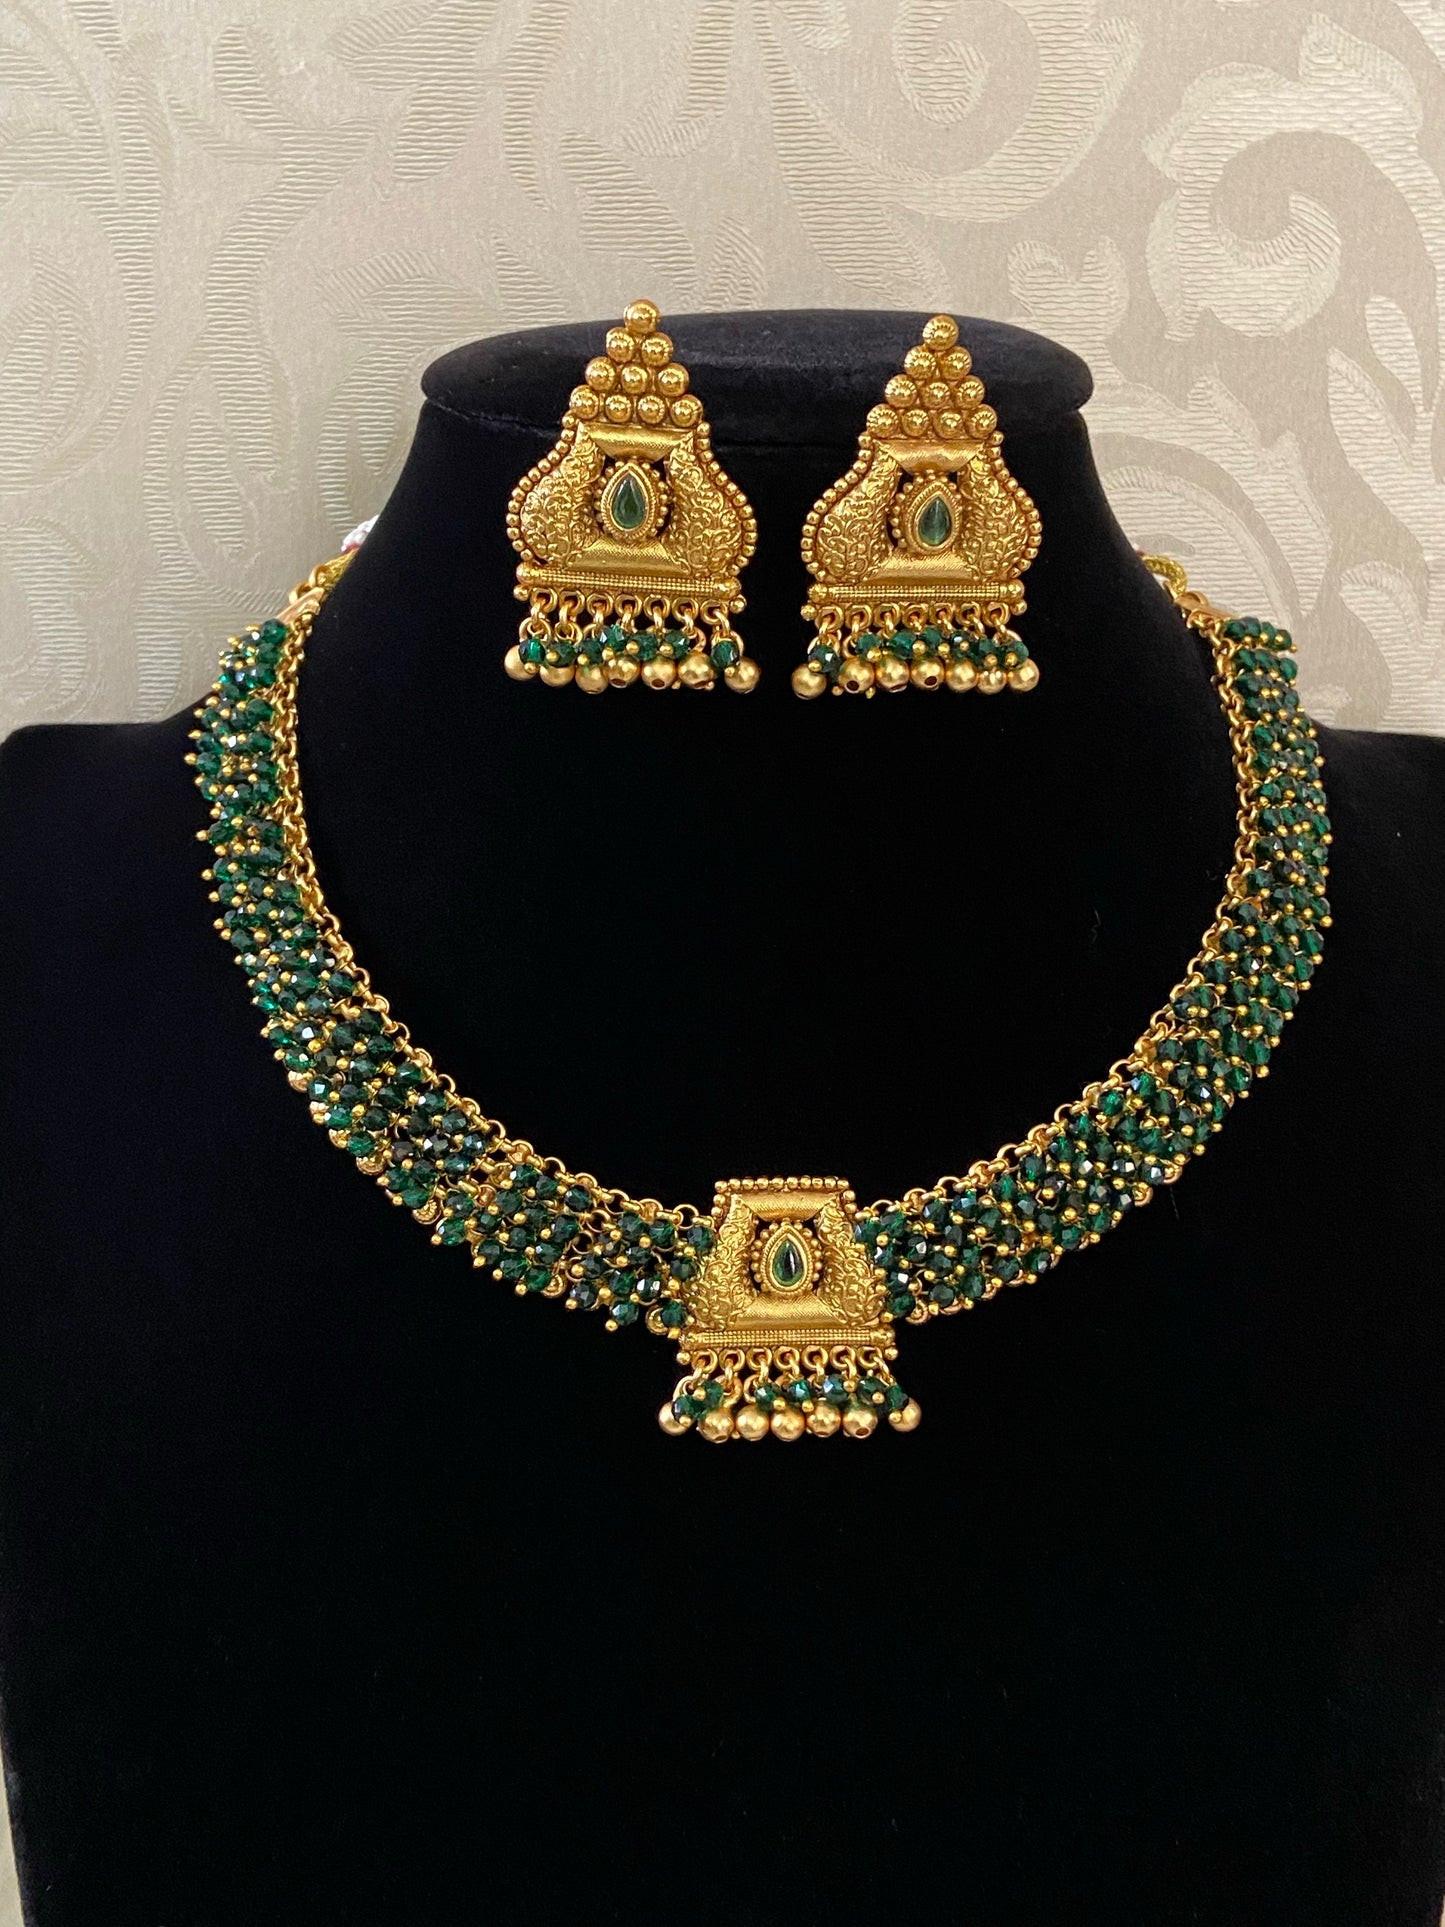 Antique necklace | Traditional jewelry